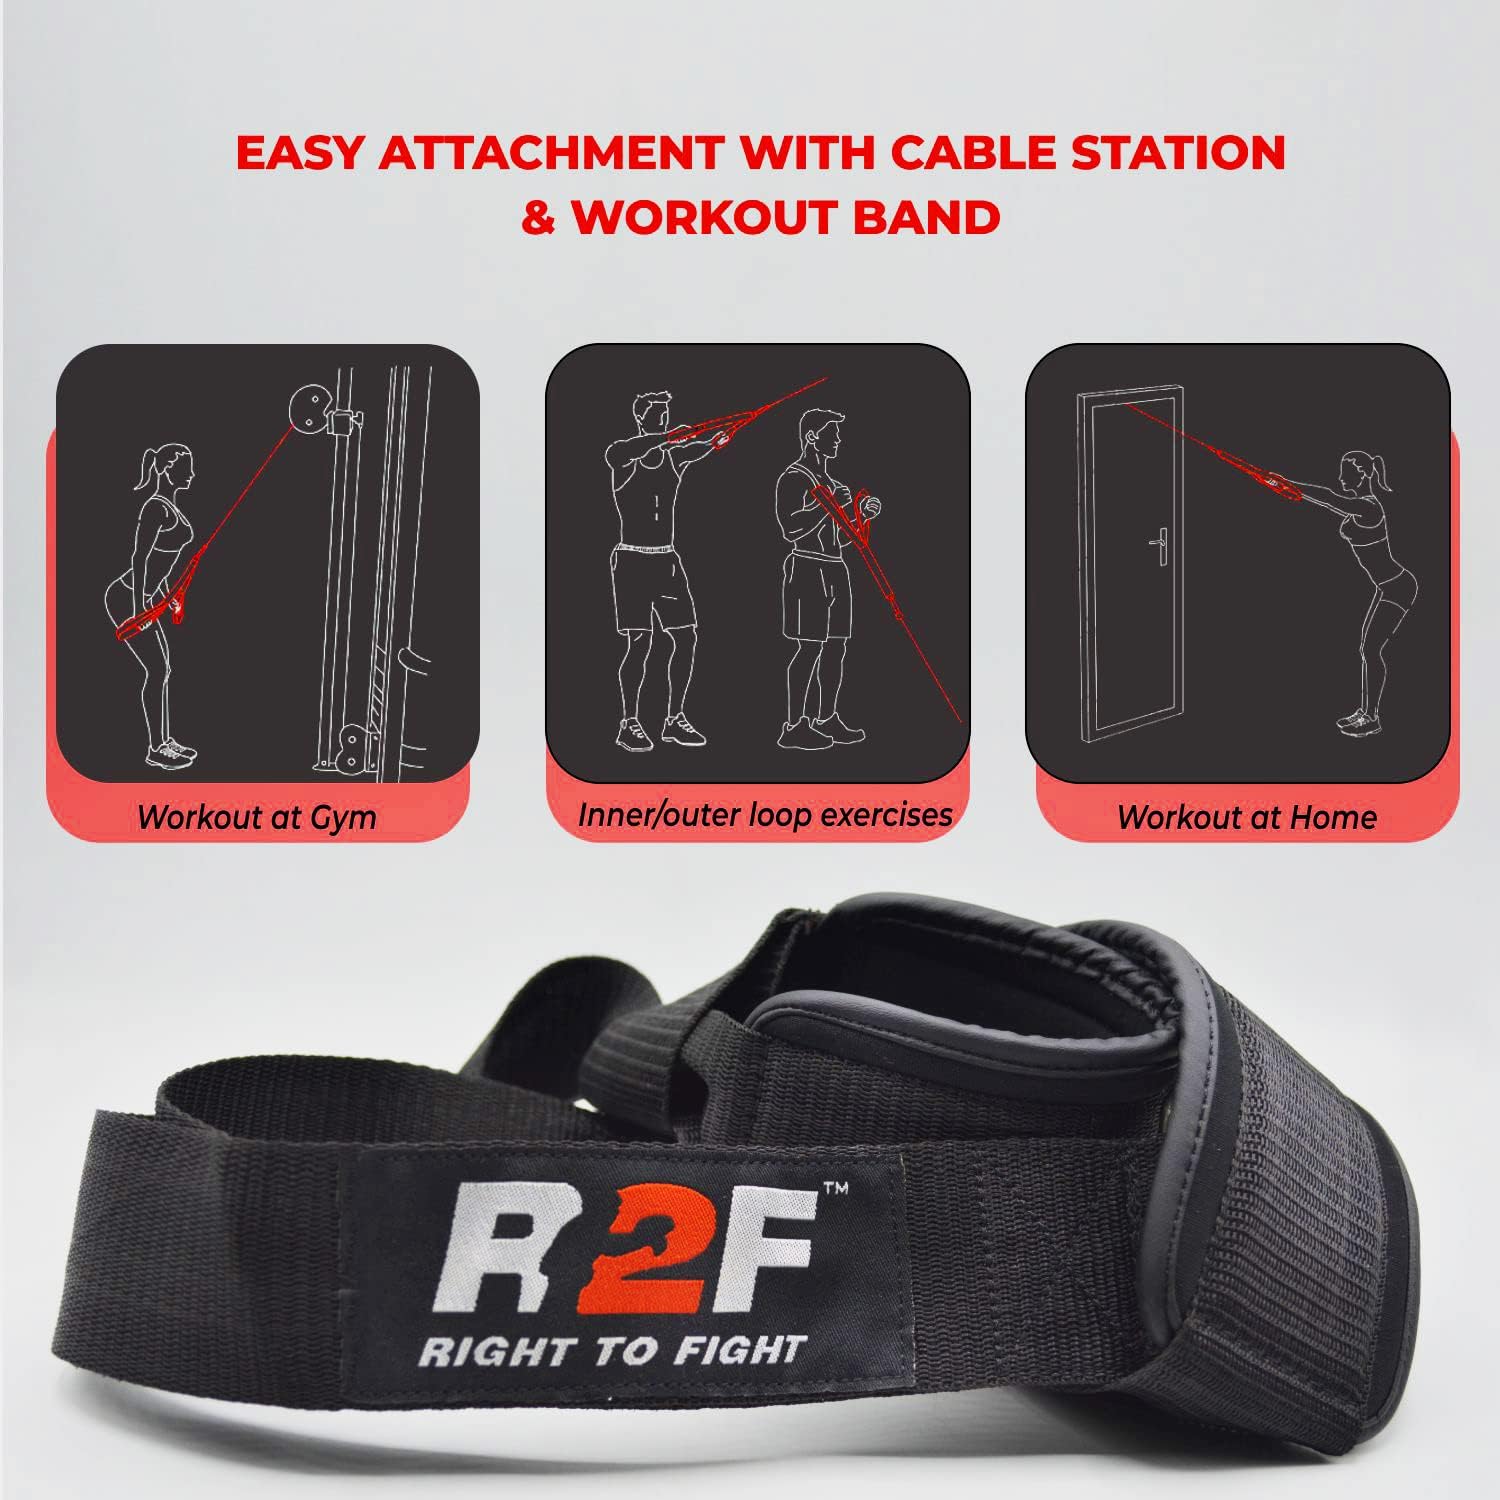 R2F Tricep Rope Cable Machine Attachment Nylon Heavy Duty Rope Cable Attachment for Fitness with Non-Slip Handles Multi Gym Fitness Workout, Biceps, Triceps, Gym or Home or Anywhere.